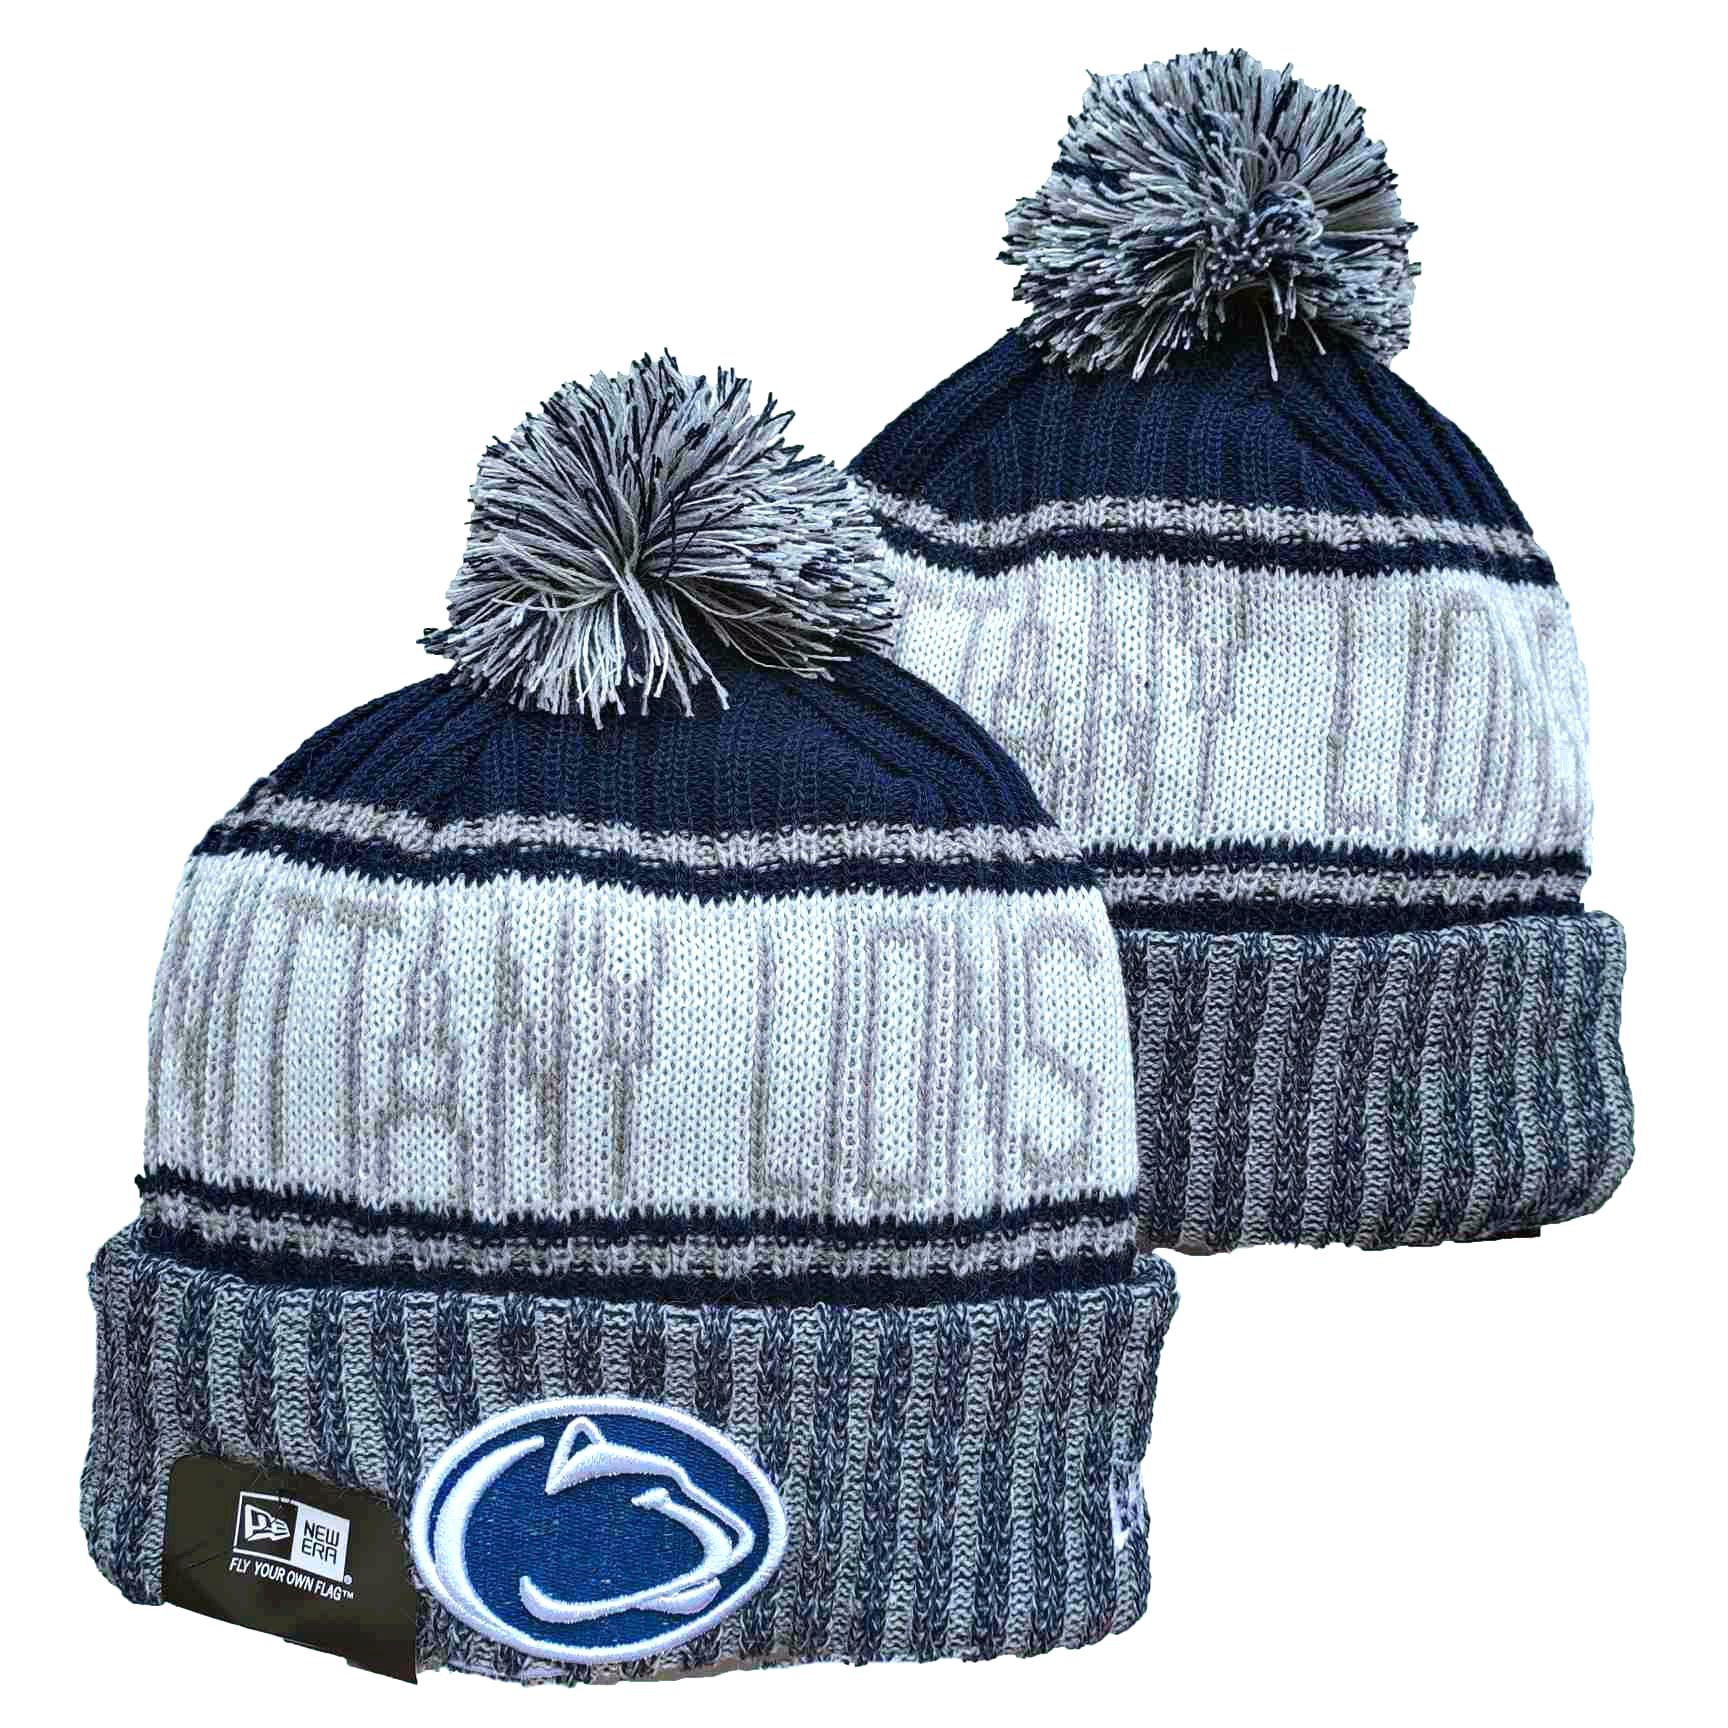 NCAA Penn State Nittany Lions Beanies Knit Hats-YD404